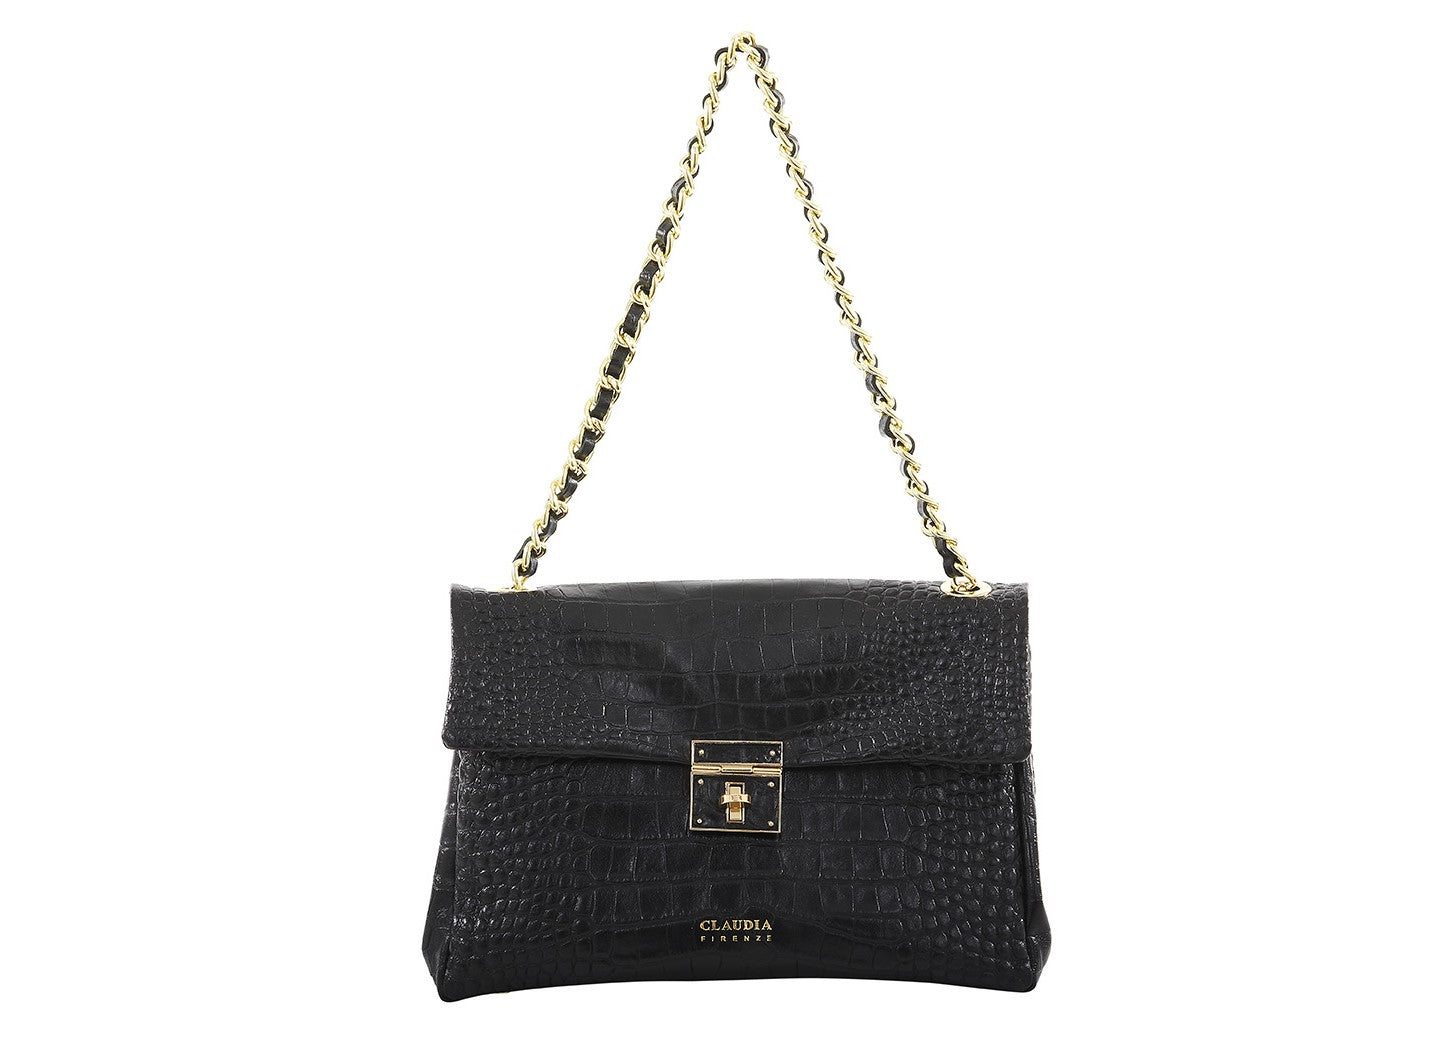 Caban Croco Leather Satchel in Black by Claudia Firenze